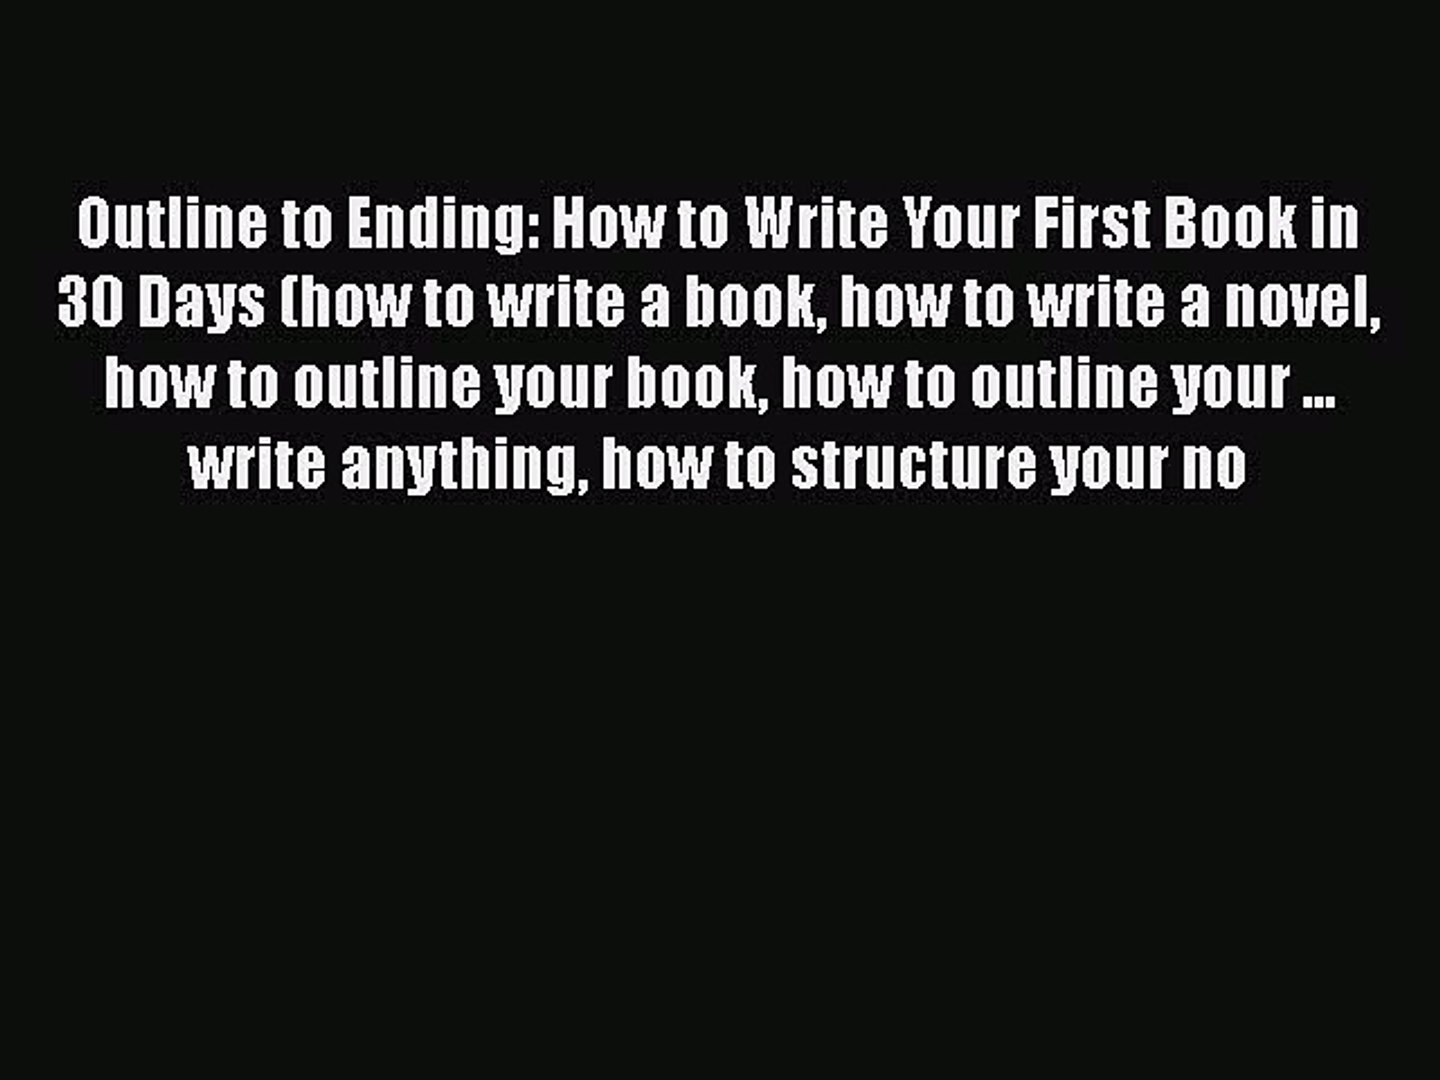 Read Outline to Ending: How to Write Your First Book in 30 Days